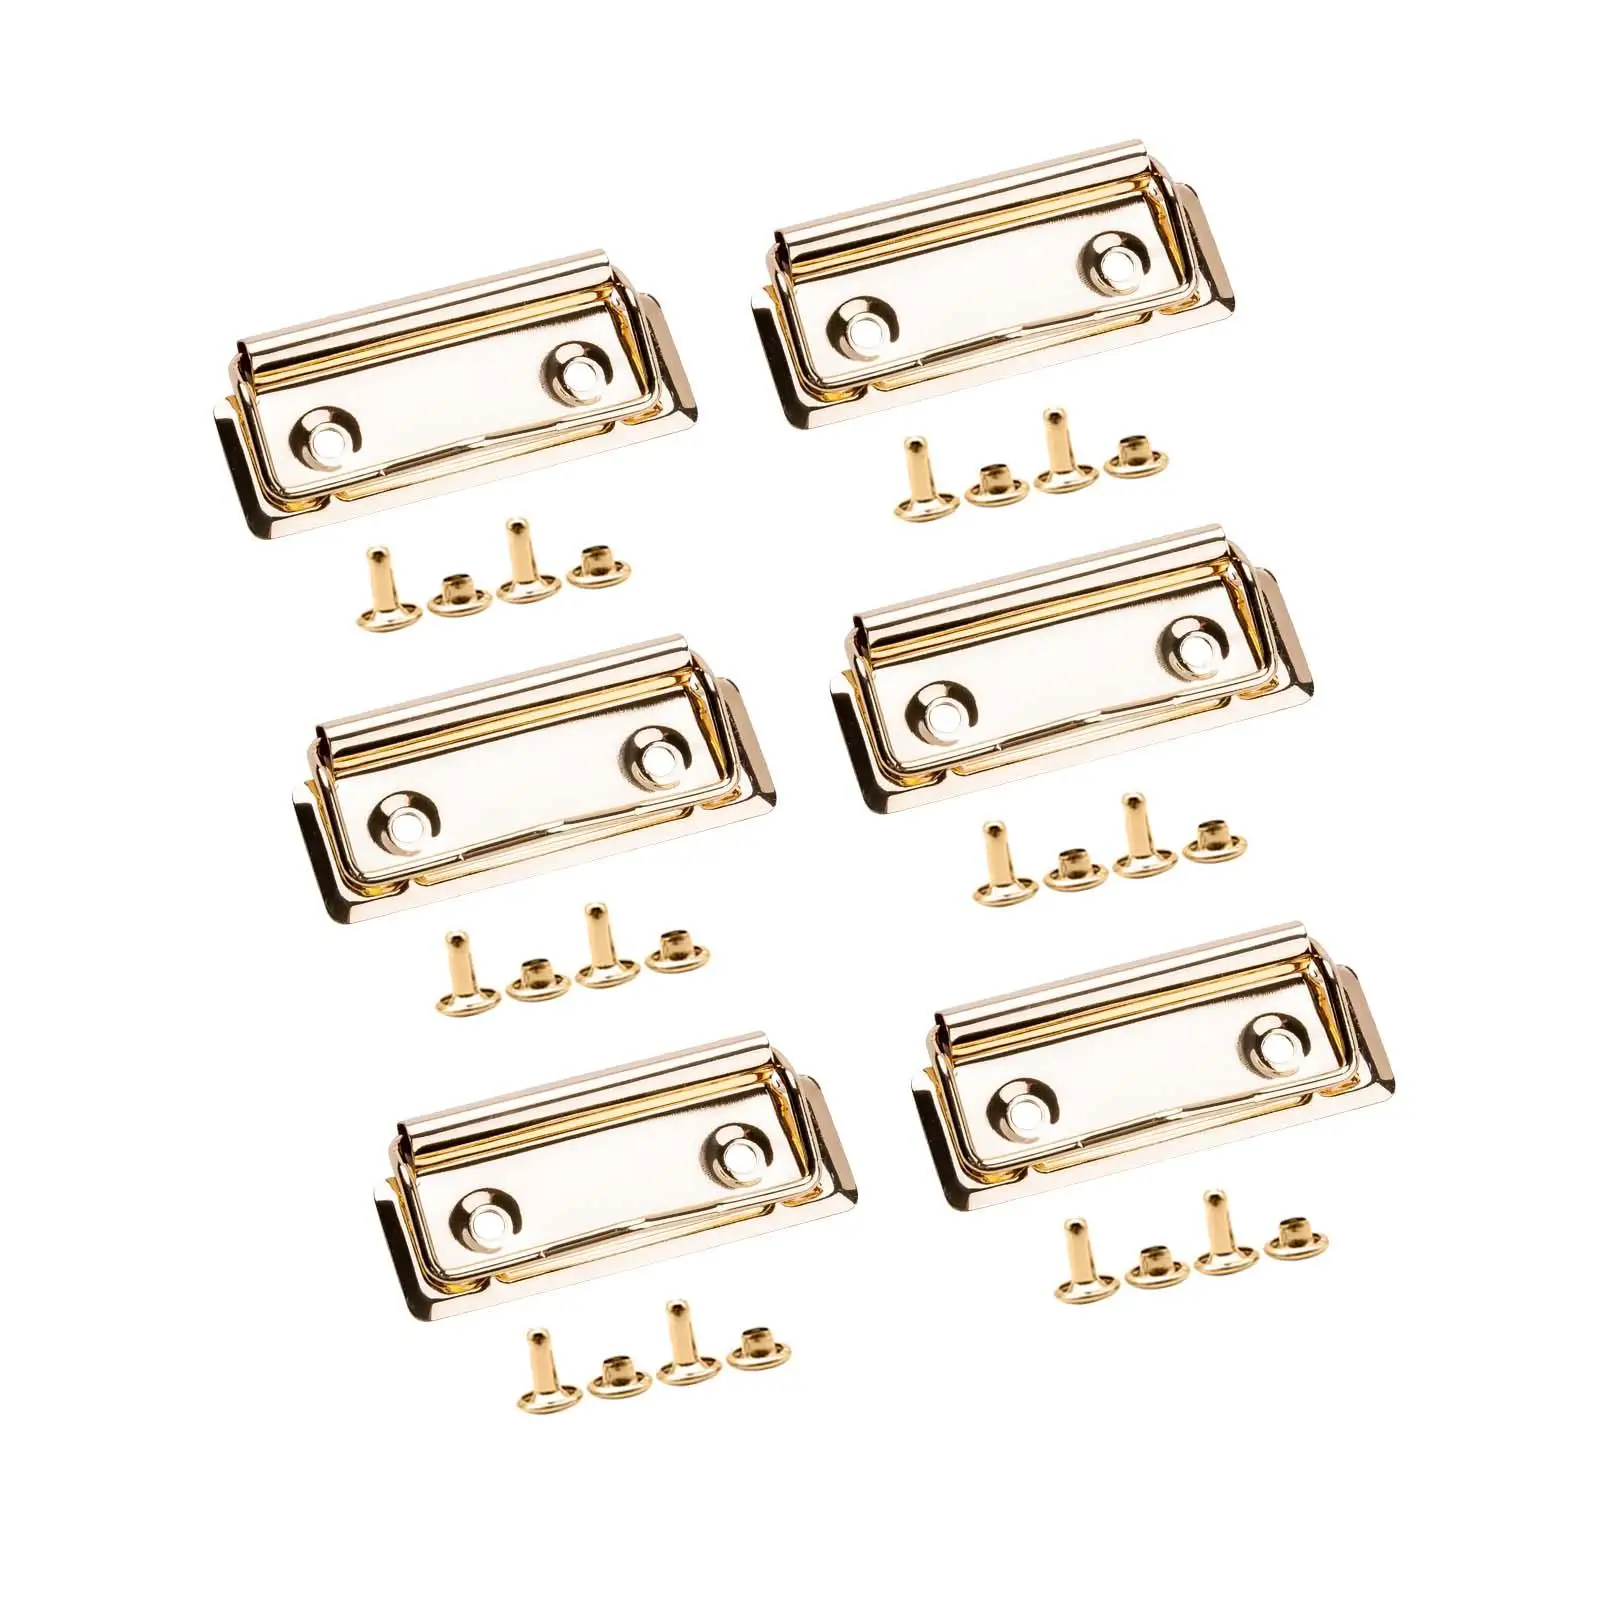 6x Mountable Clipboard Clips Heavy Duty Metal Document File Board Clips Stationery Plate Holder for Stationery Supplies Business